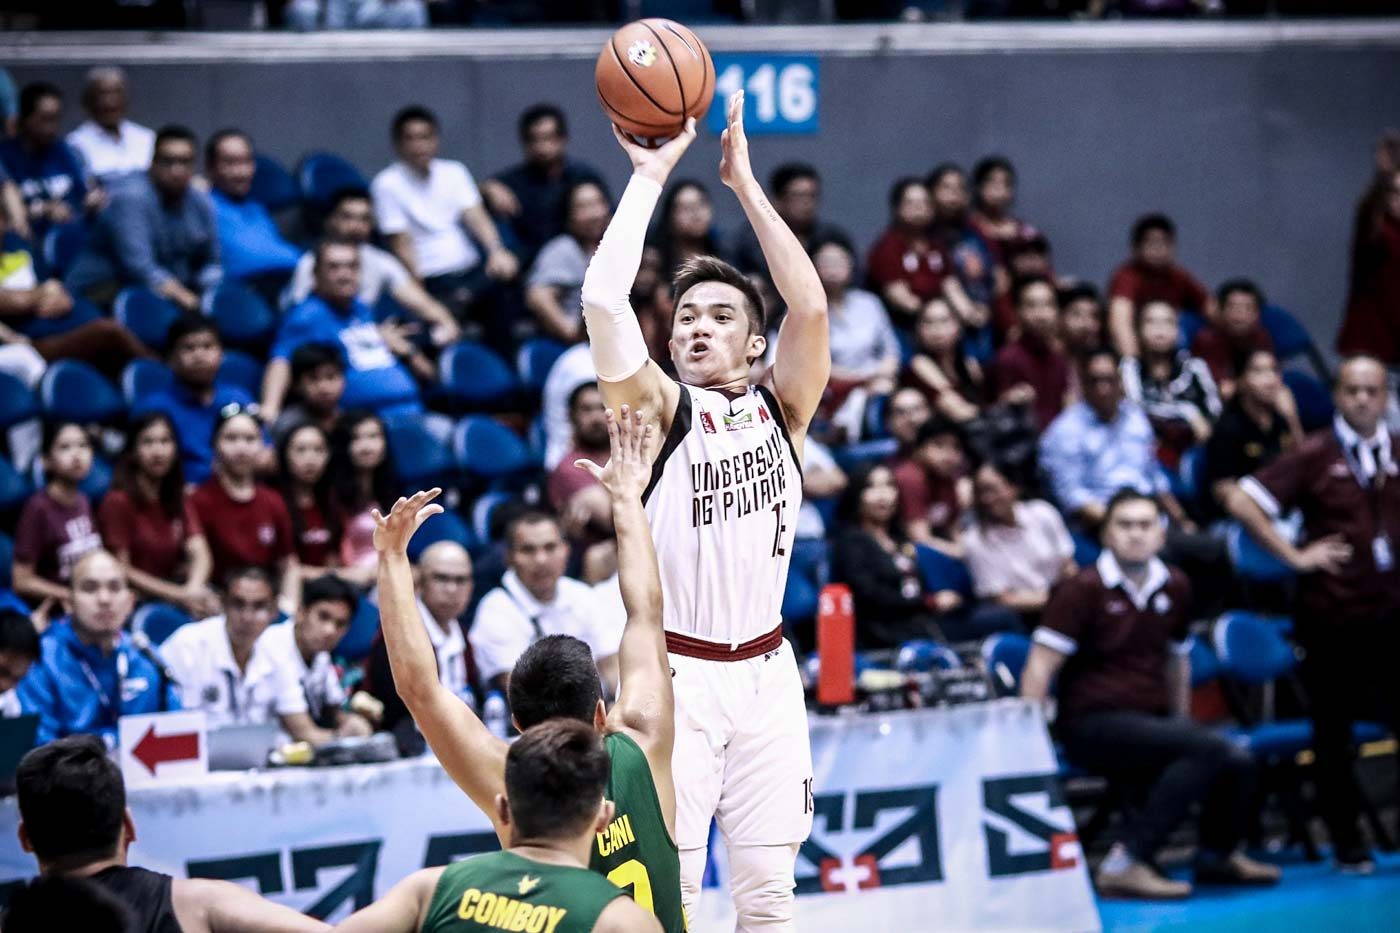 Desiderio erupts for career-high 31 as UP downs depleted FEU